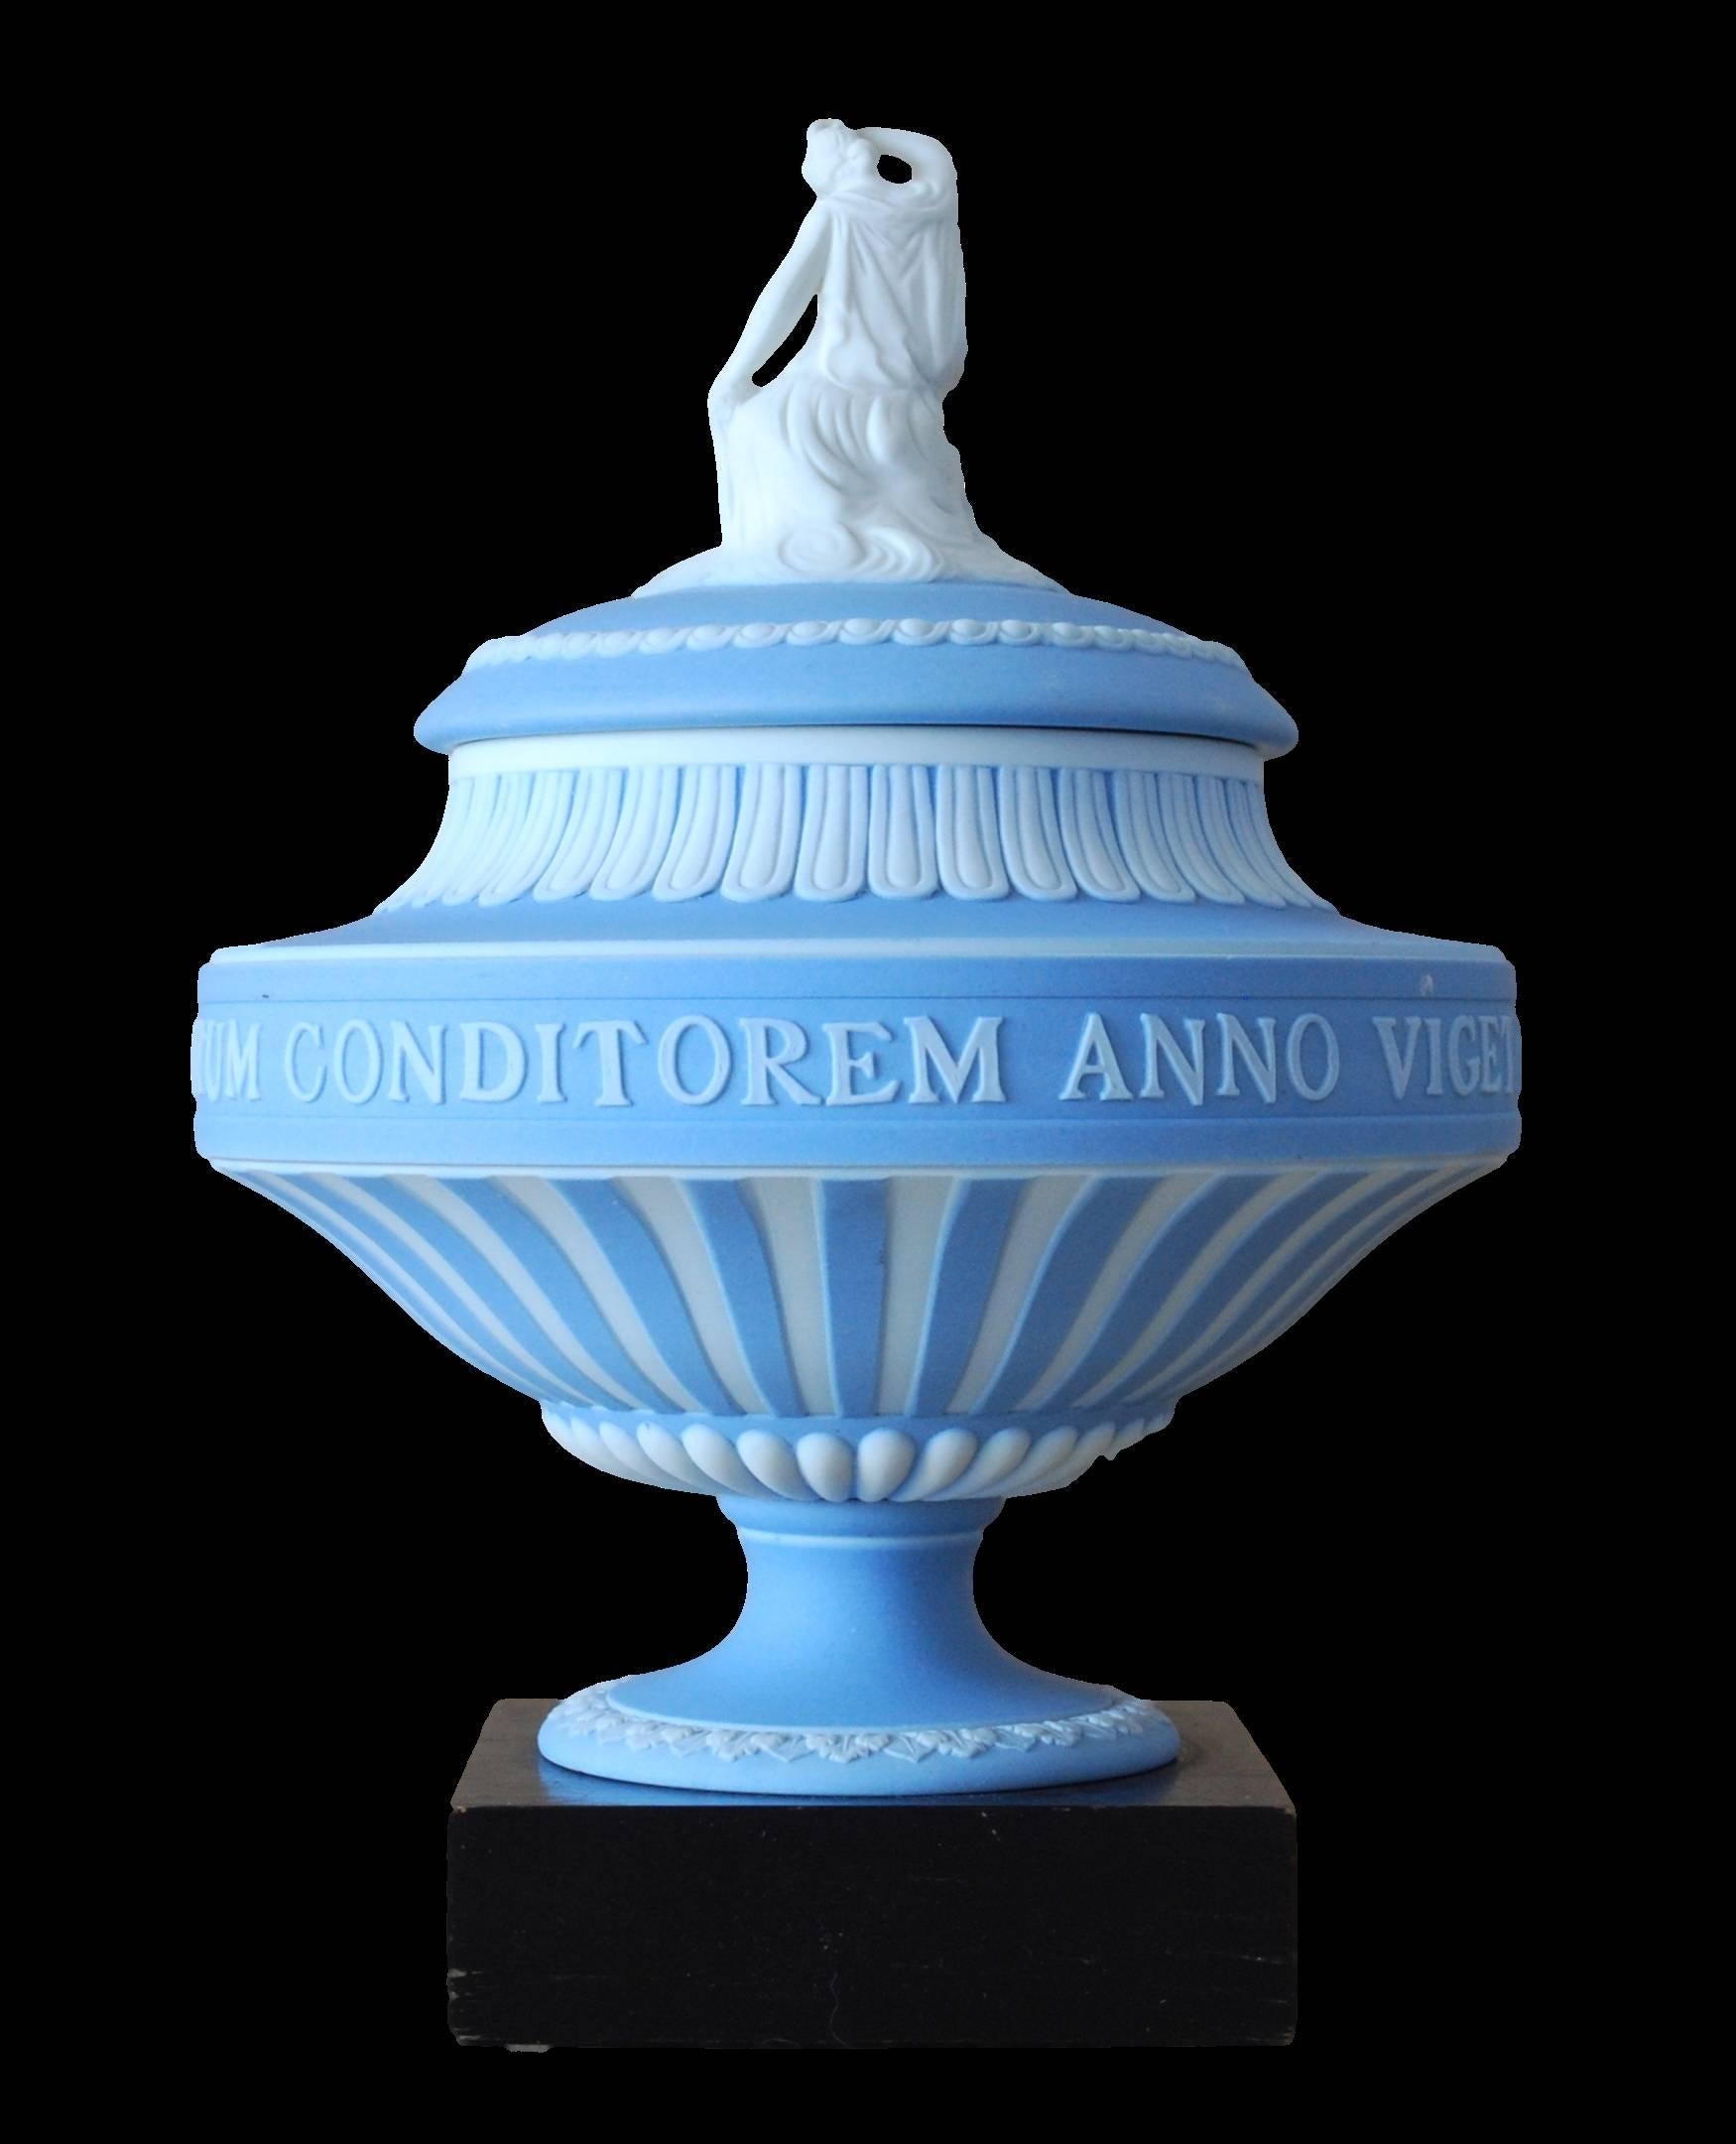 Wedgwood made 50 of these vases in 1930 to mark the bicentenary of Josiah’s birth, to be given to associates of the company.

The incription reads: 

CC POST NATUM CONDITOREM ANNO VIGET ARS ETRURIAE REDINTEGRATA
200 years after the birth of the